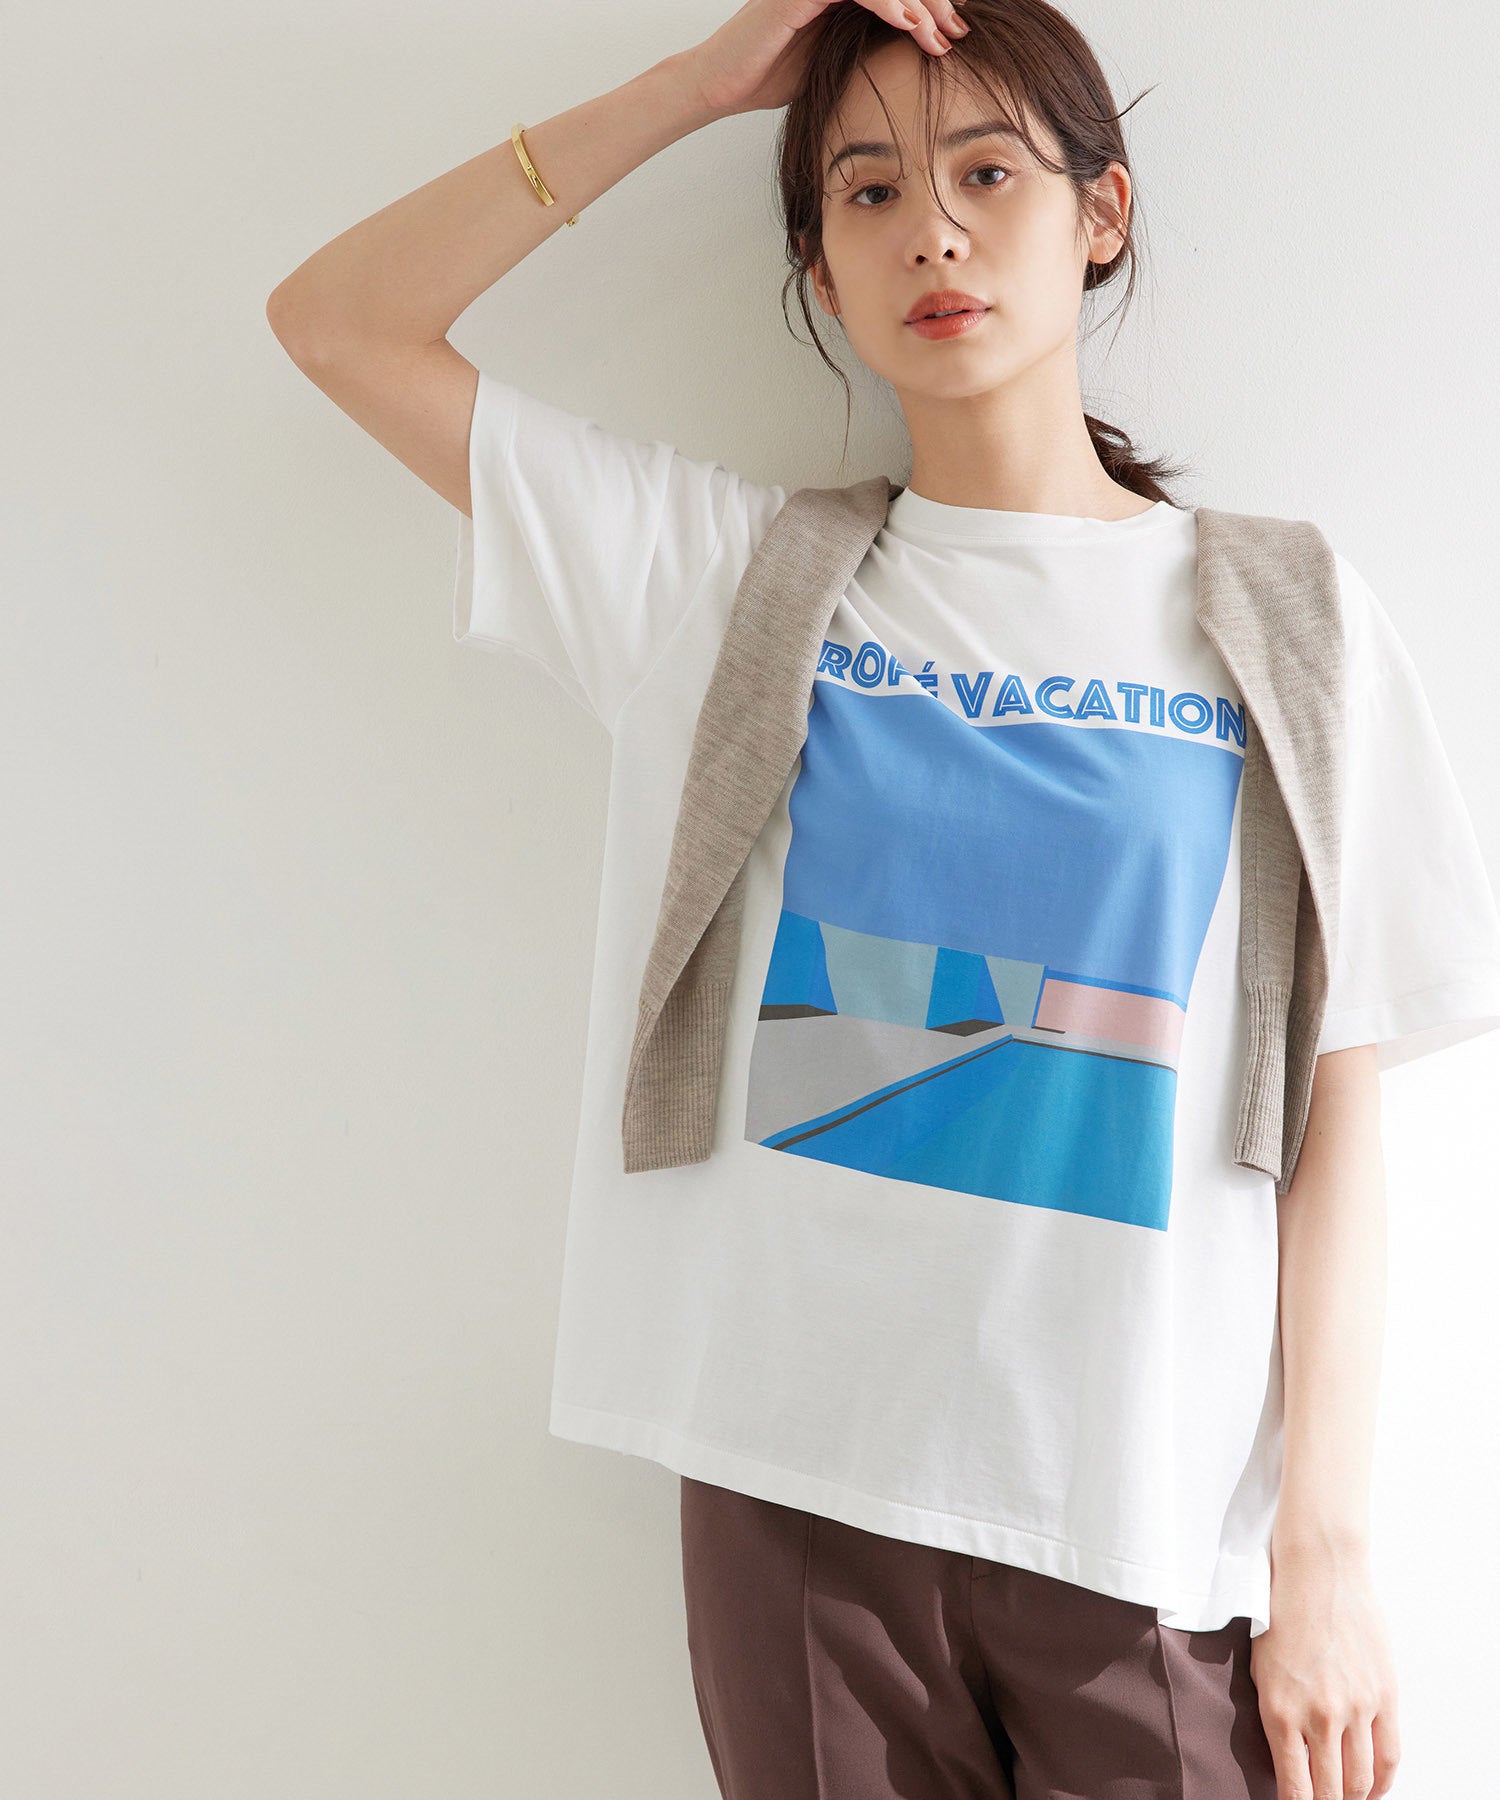 Rope 永井博 Rope Vacation Tee トップス Tシャツ カットソー 通販 J Adore Jun Online